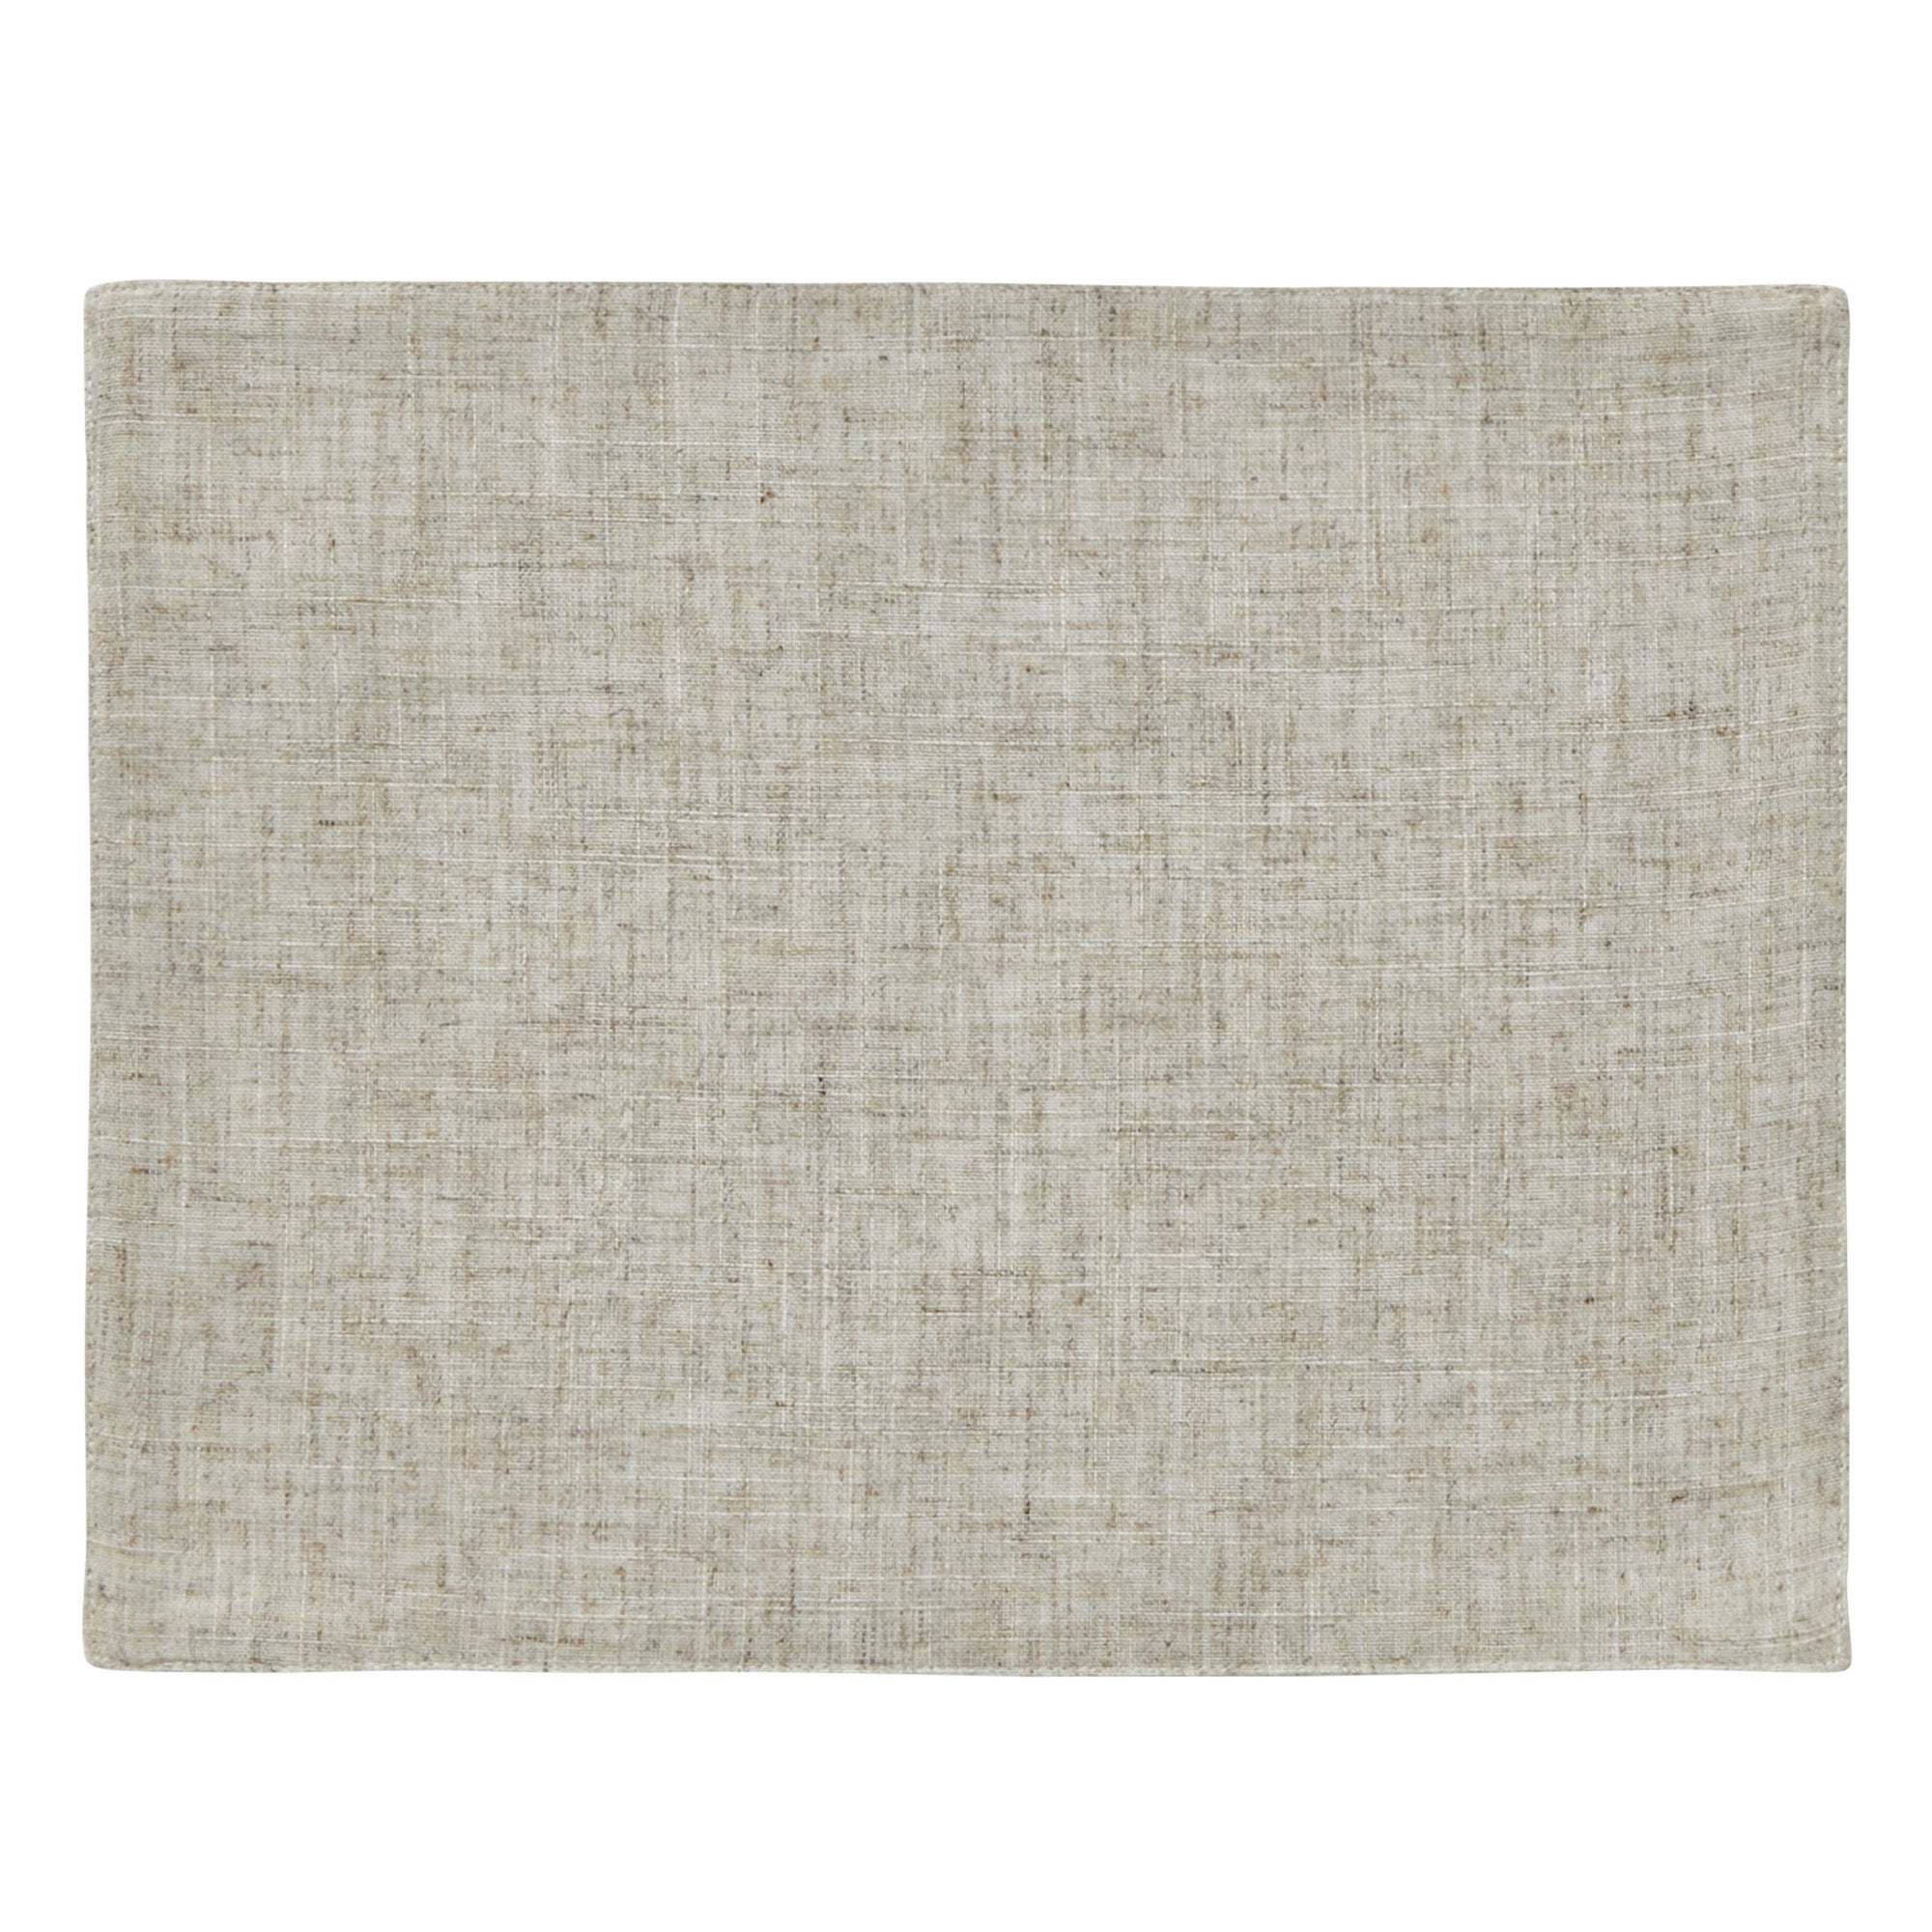 Image of Polylinen Placemat Linen (Natural)